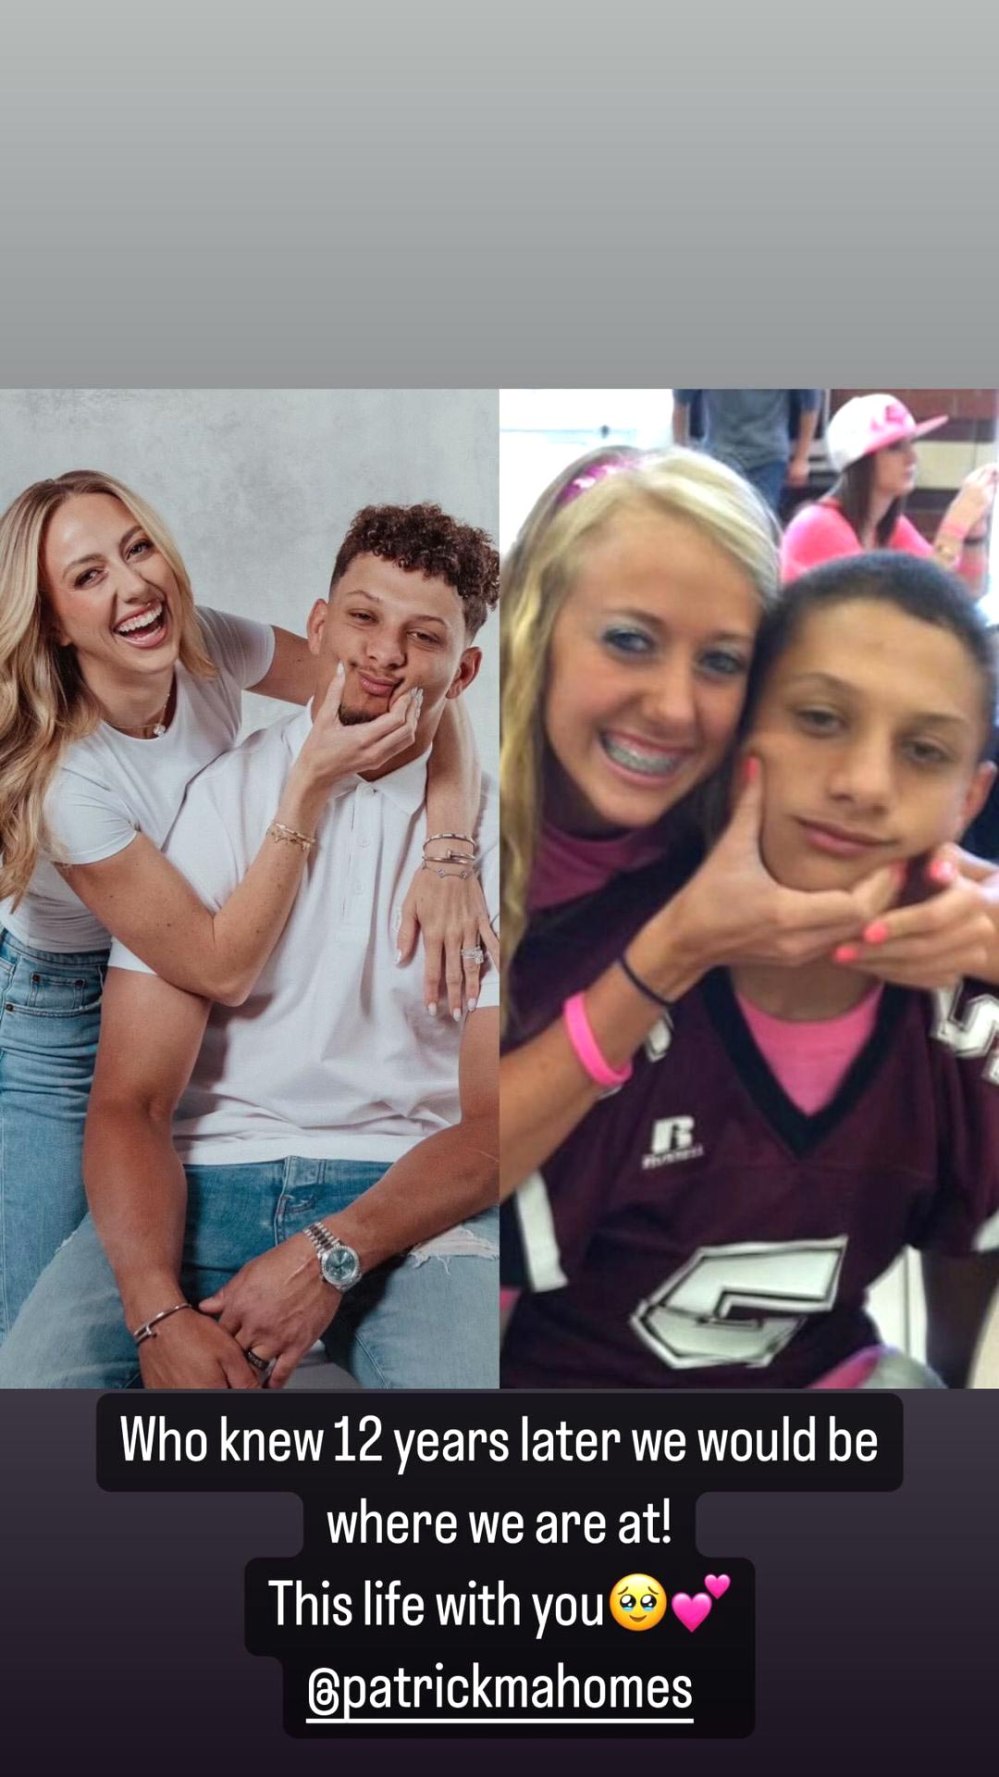 Brittany Mahomes Shares Sweet Throwback Photo of Husband Patrick in High School- '12 Years Later' 2